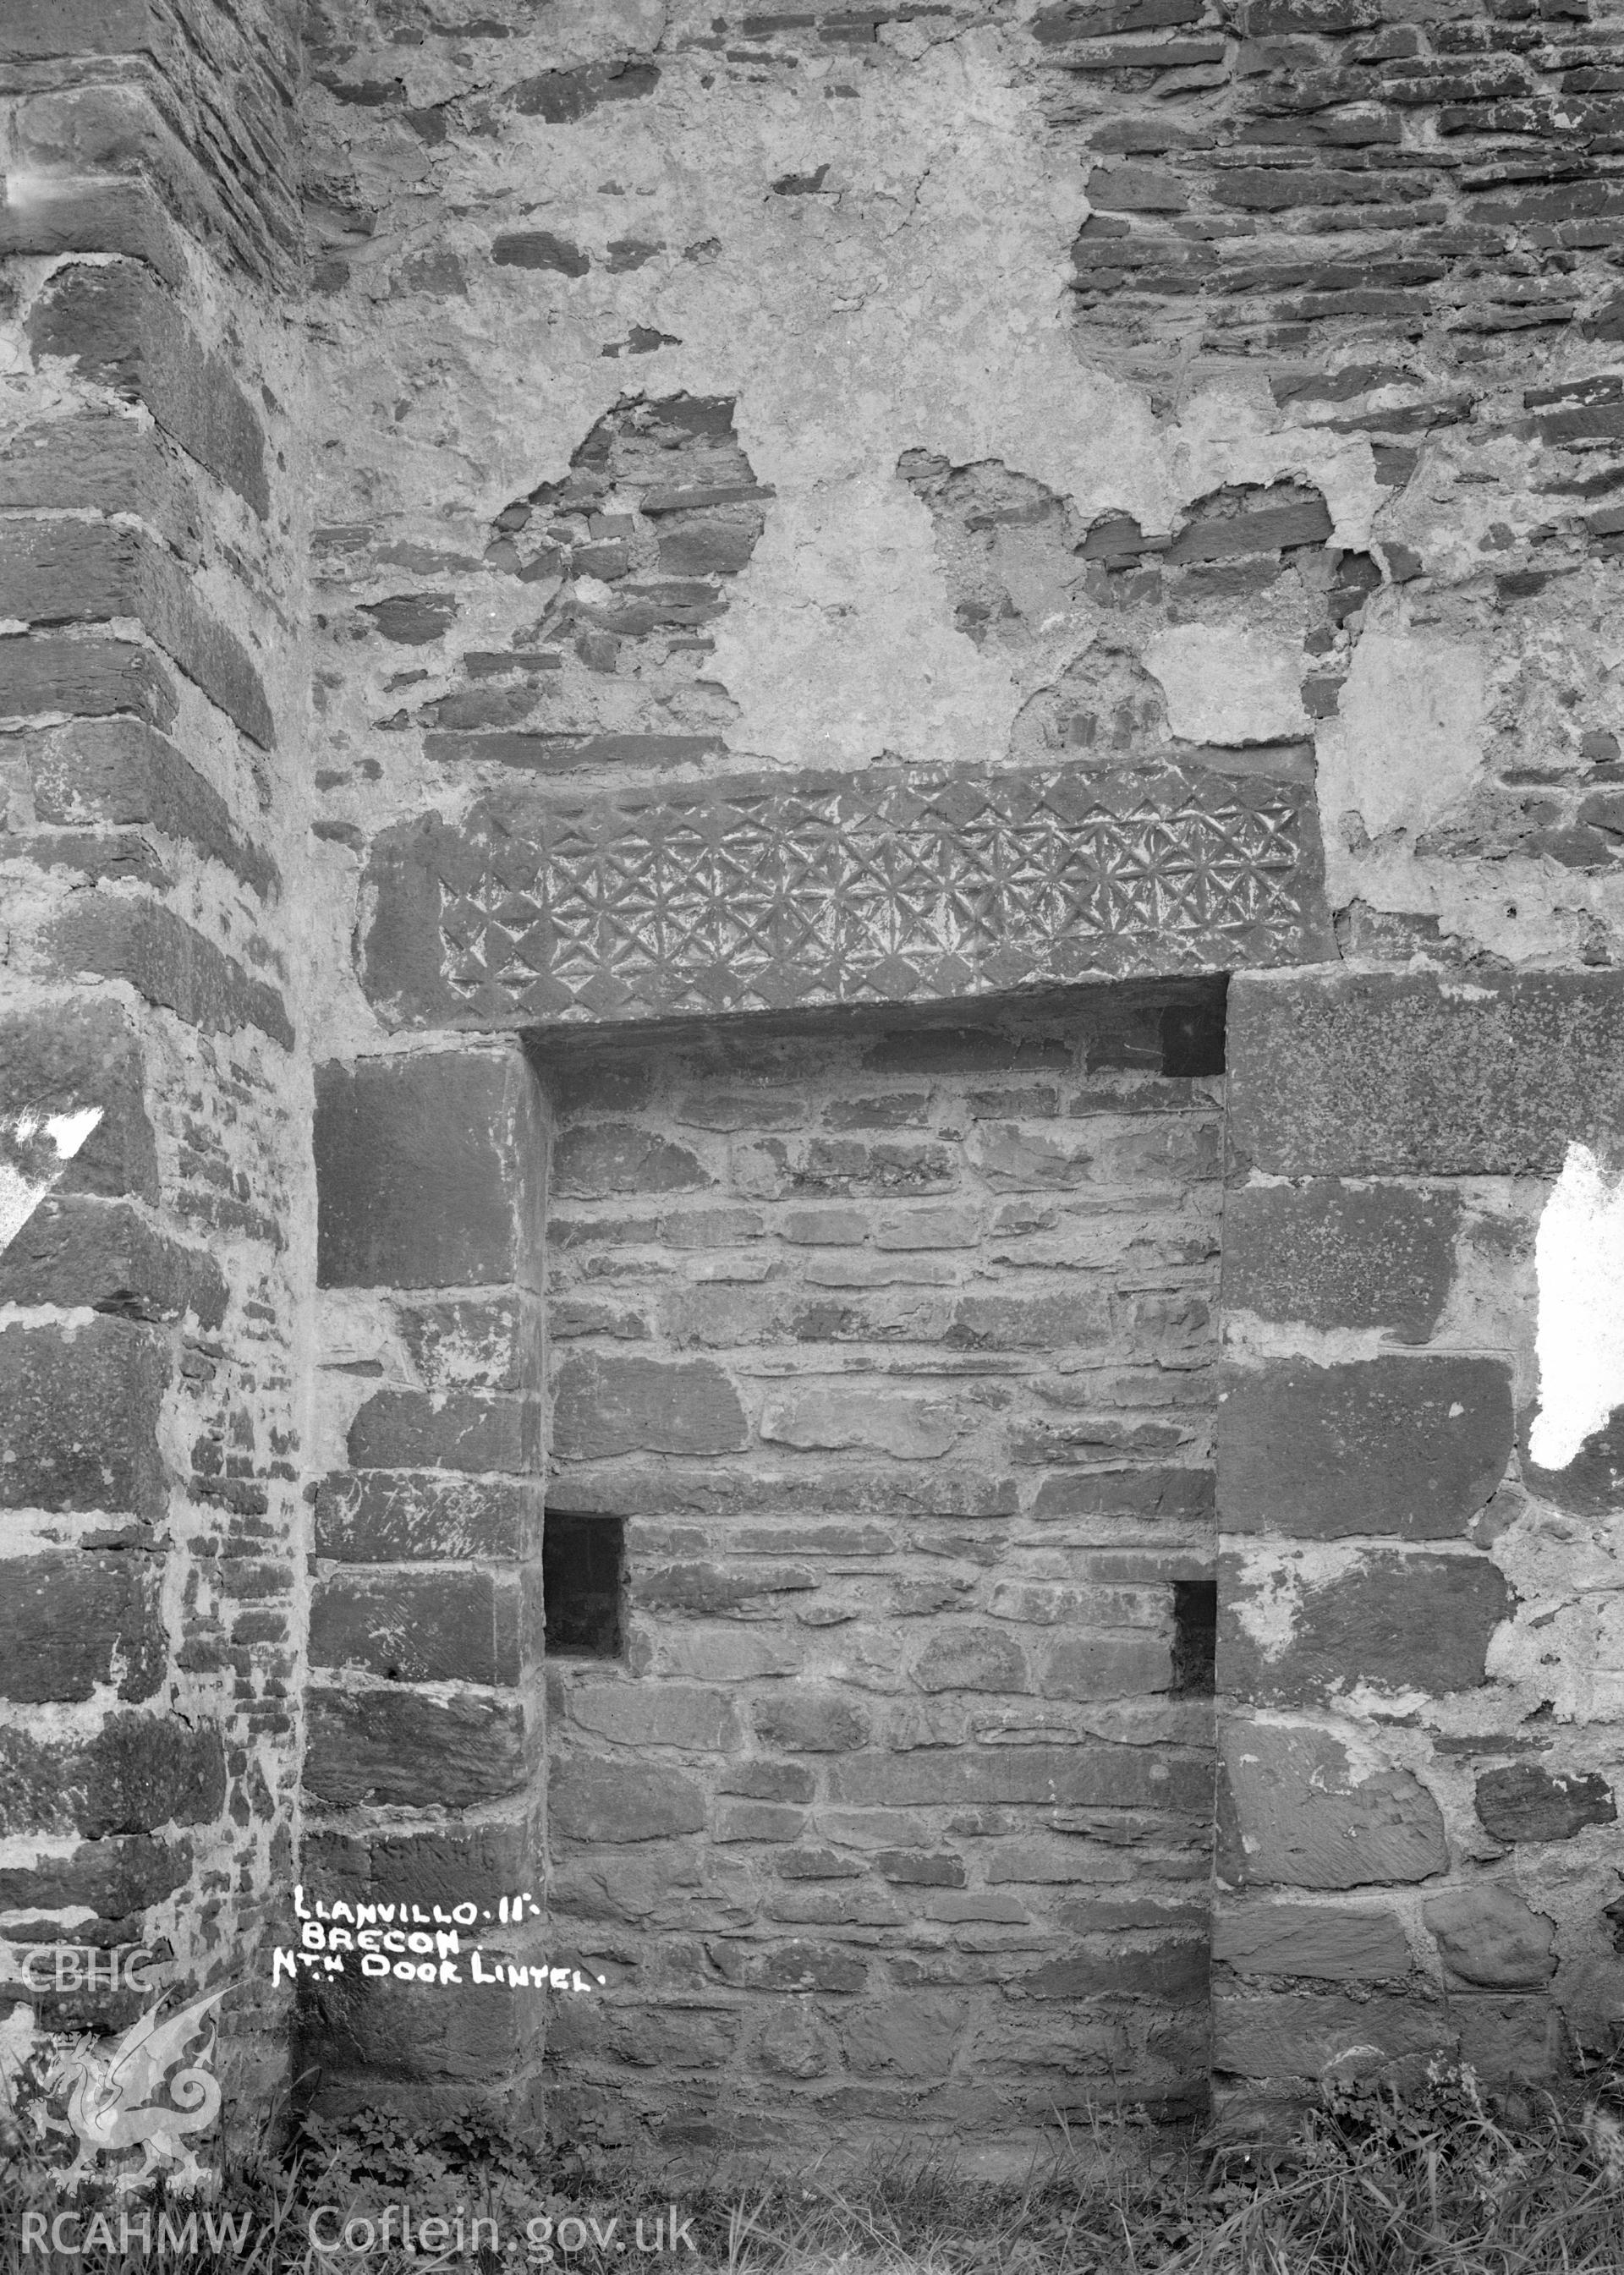 View of Llanfilo Church showing north door lintel, taken by W A Call 1931.